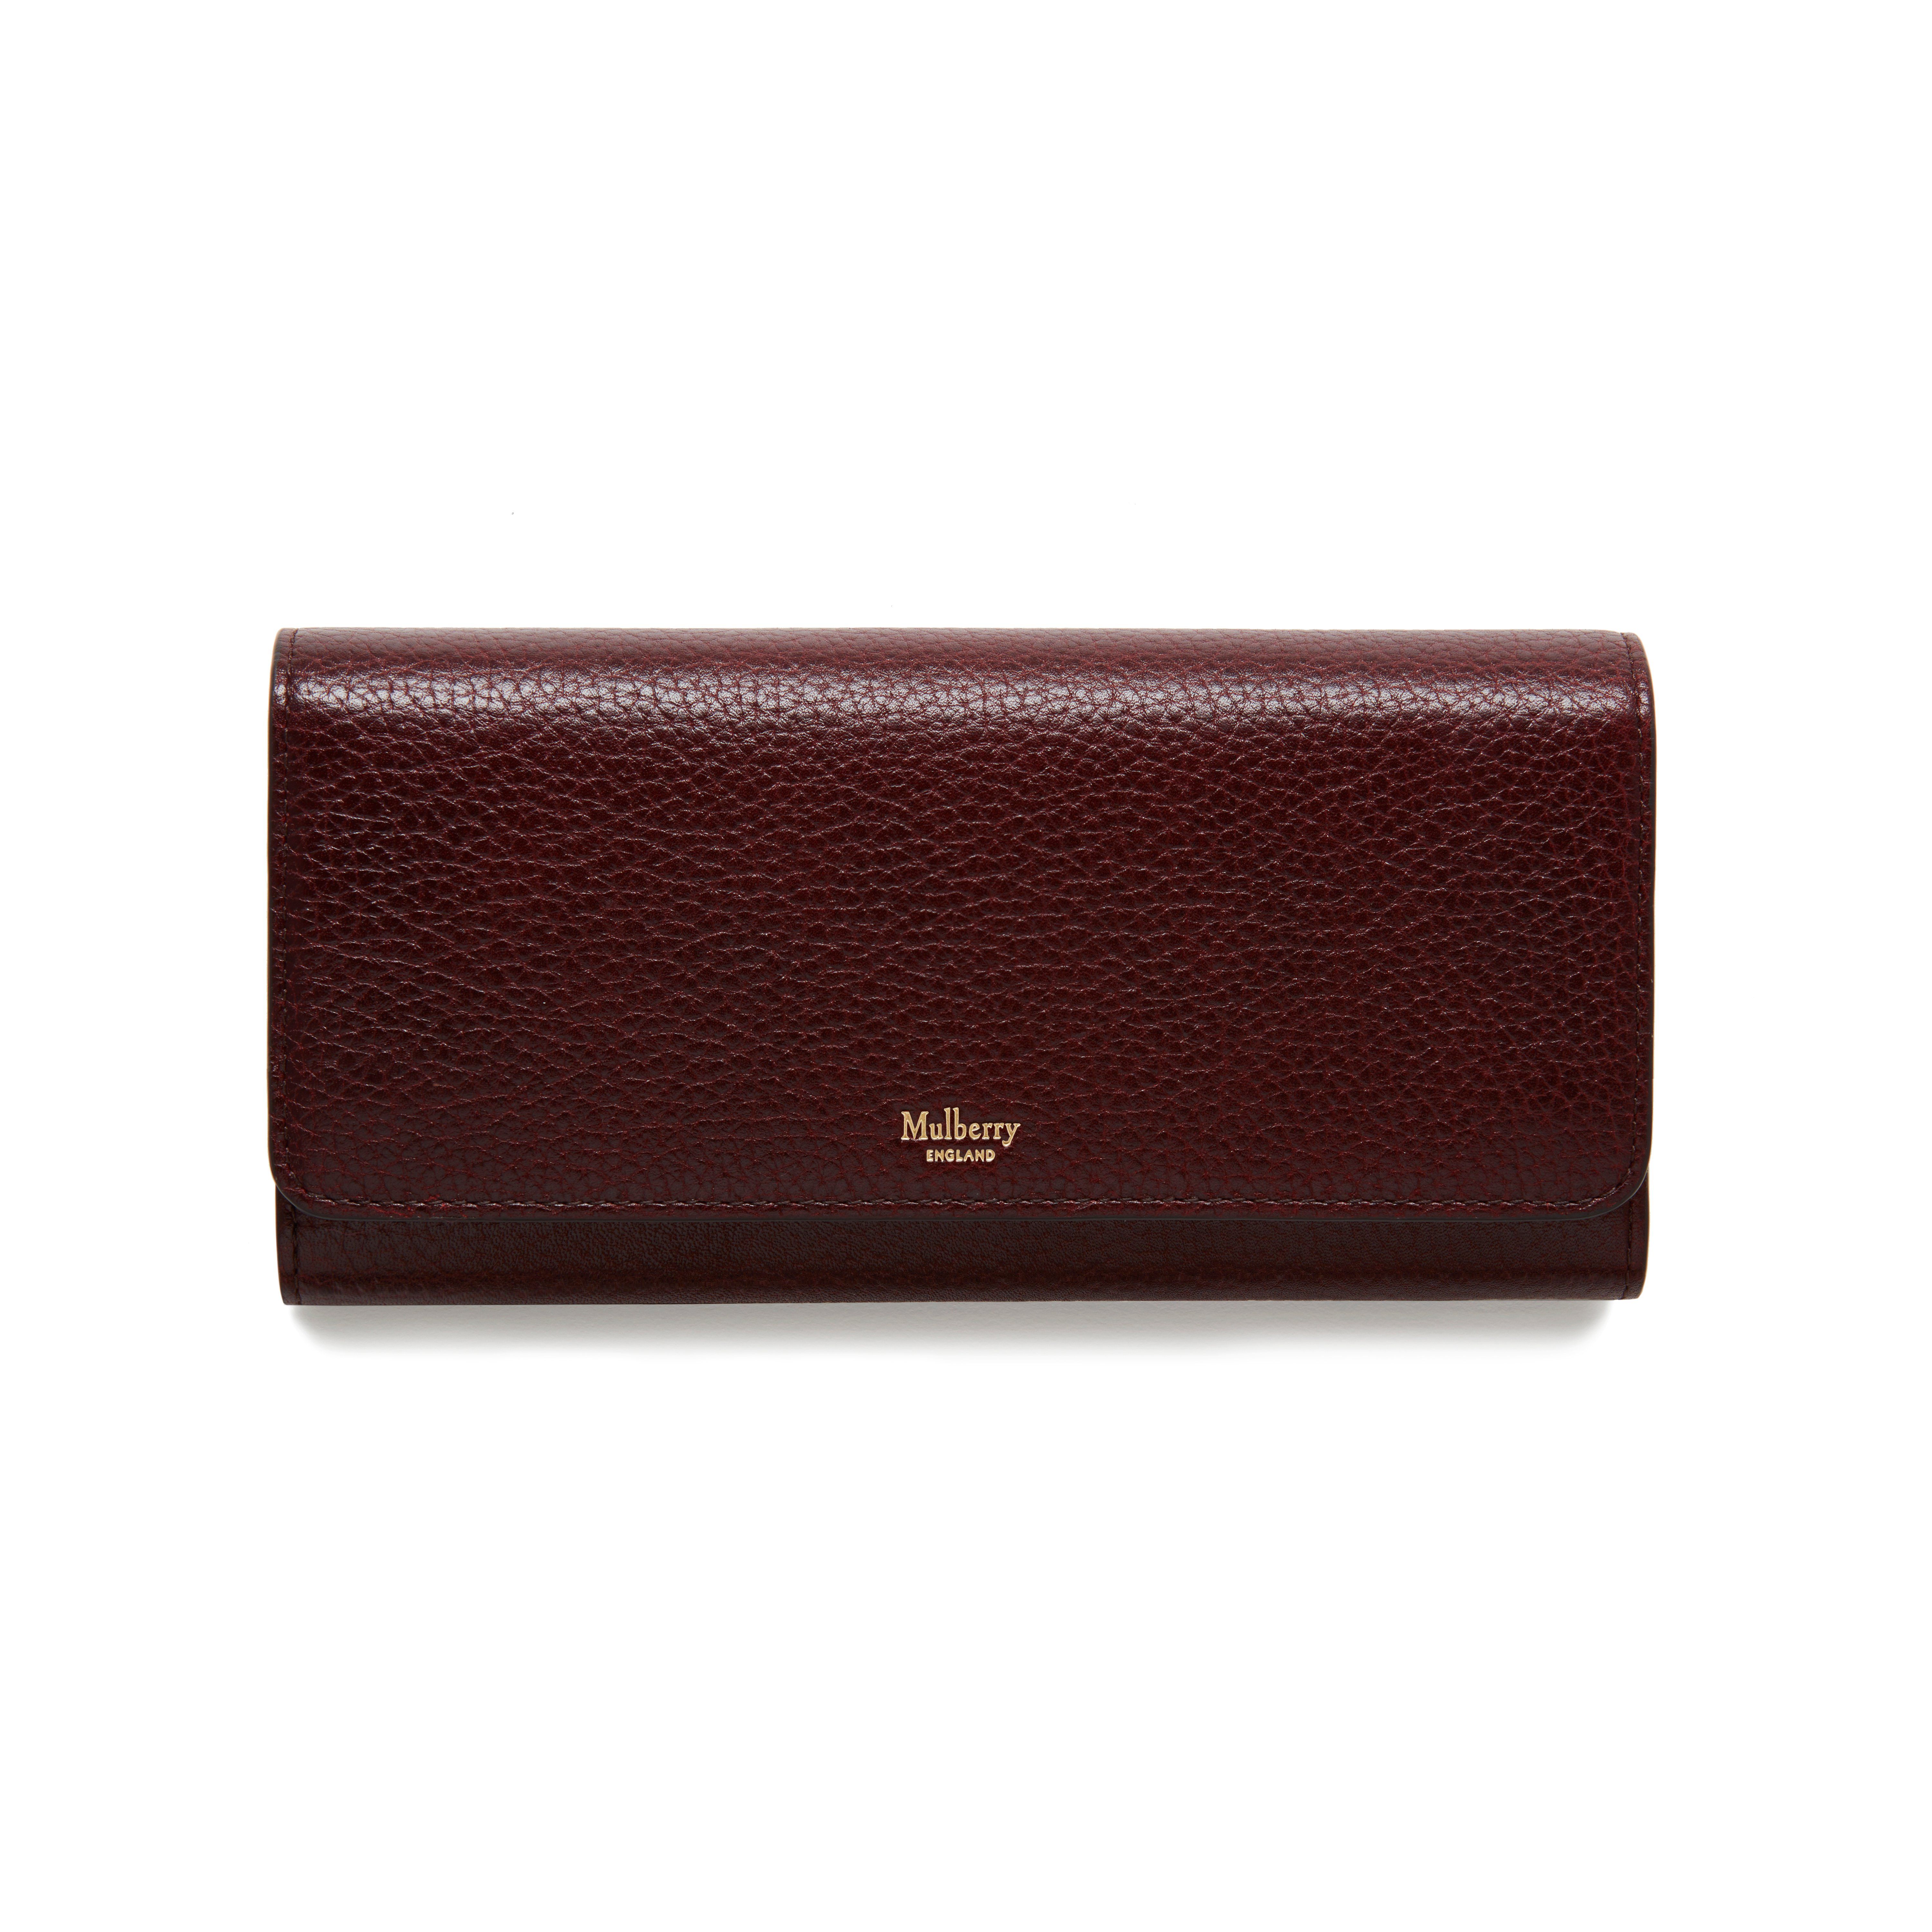 Continental Wallet | Oxblood Natural Grain Leather | Family | Mulberry